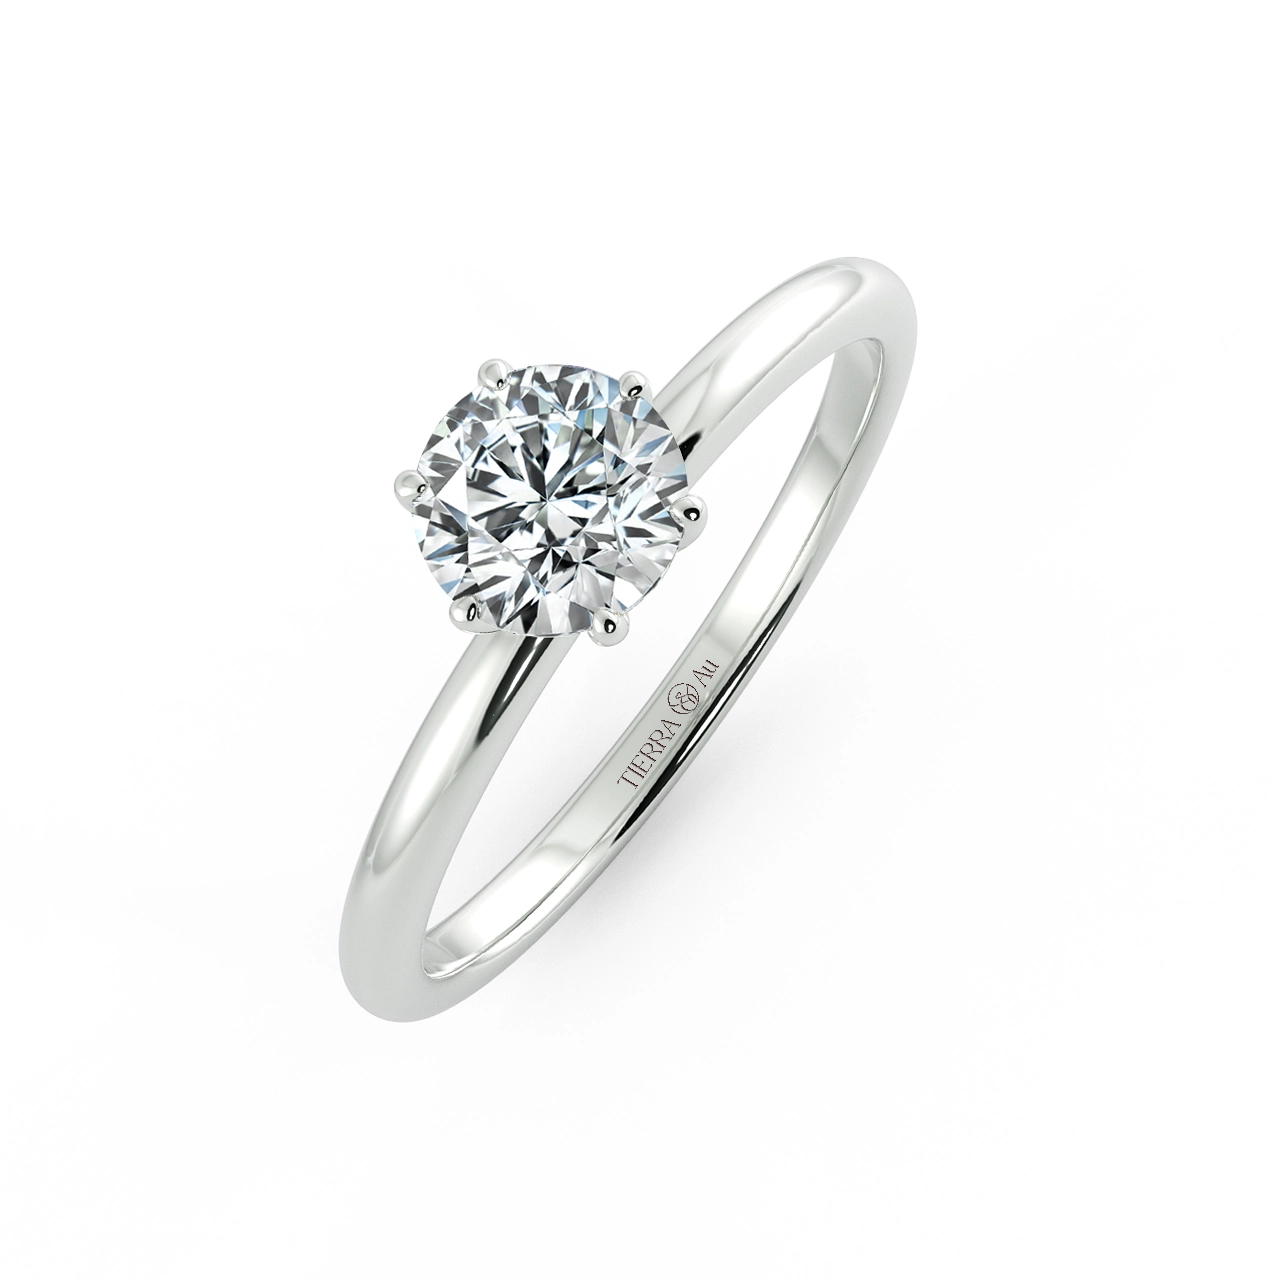 Four Prongs Solitaire Classic Engagement Ring NCH1101 3